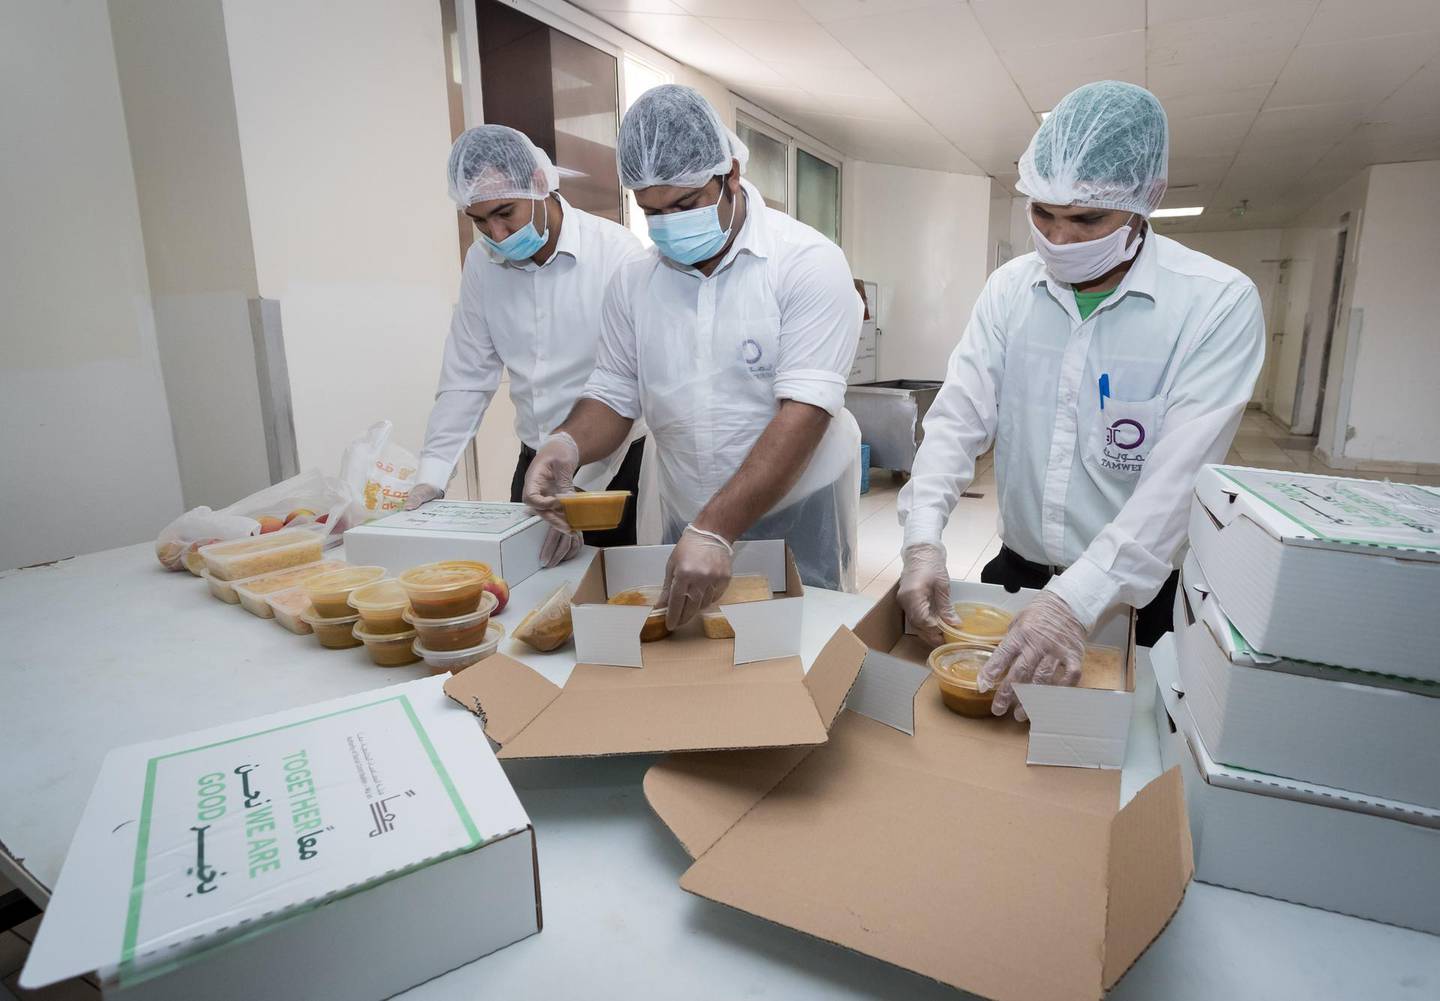 Abu Dhabi’s Authority of Social Contribution – Ma’an has delivered millions of meals to workers through its 'Together We Are Good' programme. Courtesy: Ma'an